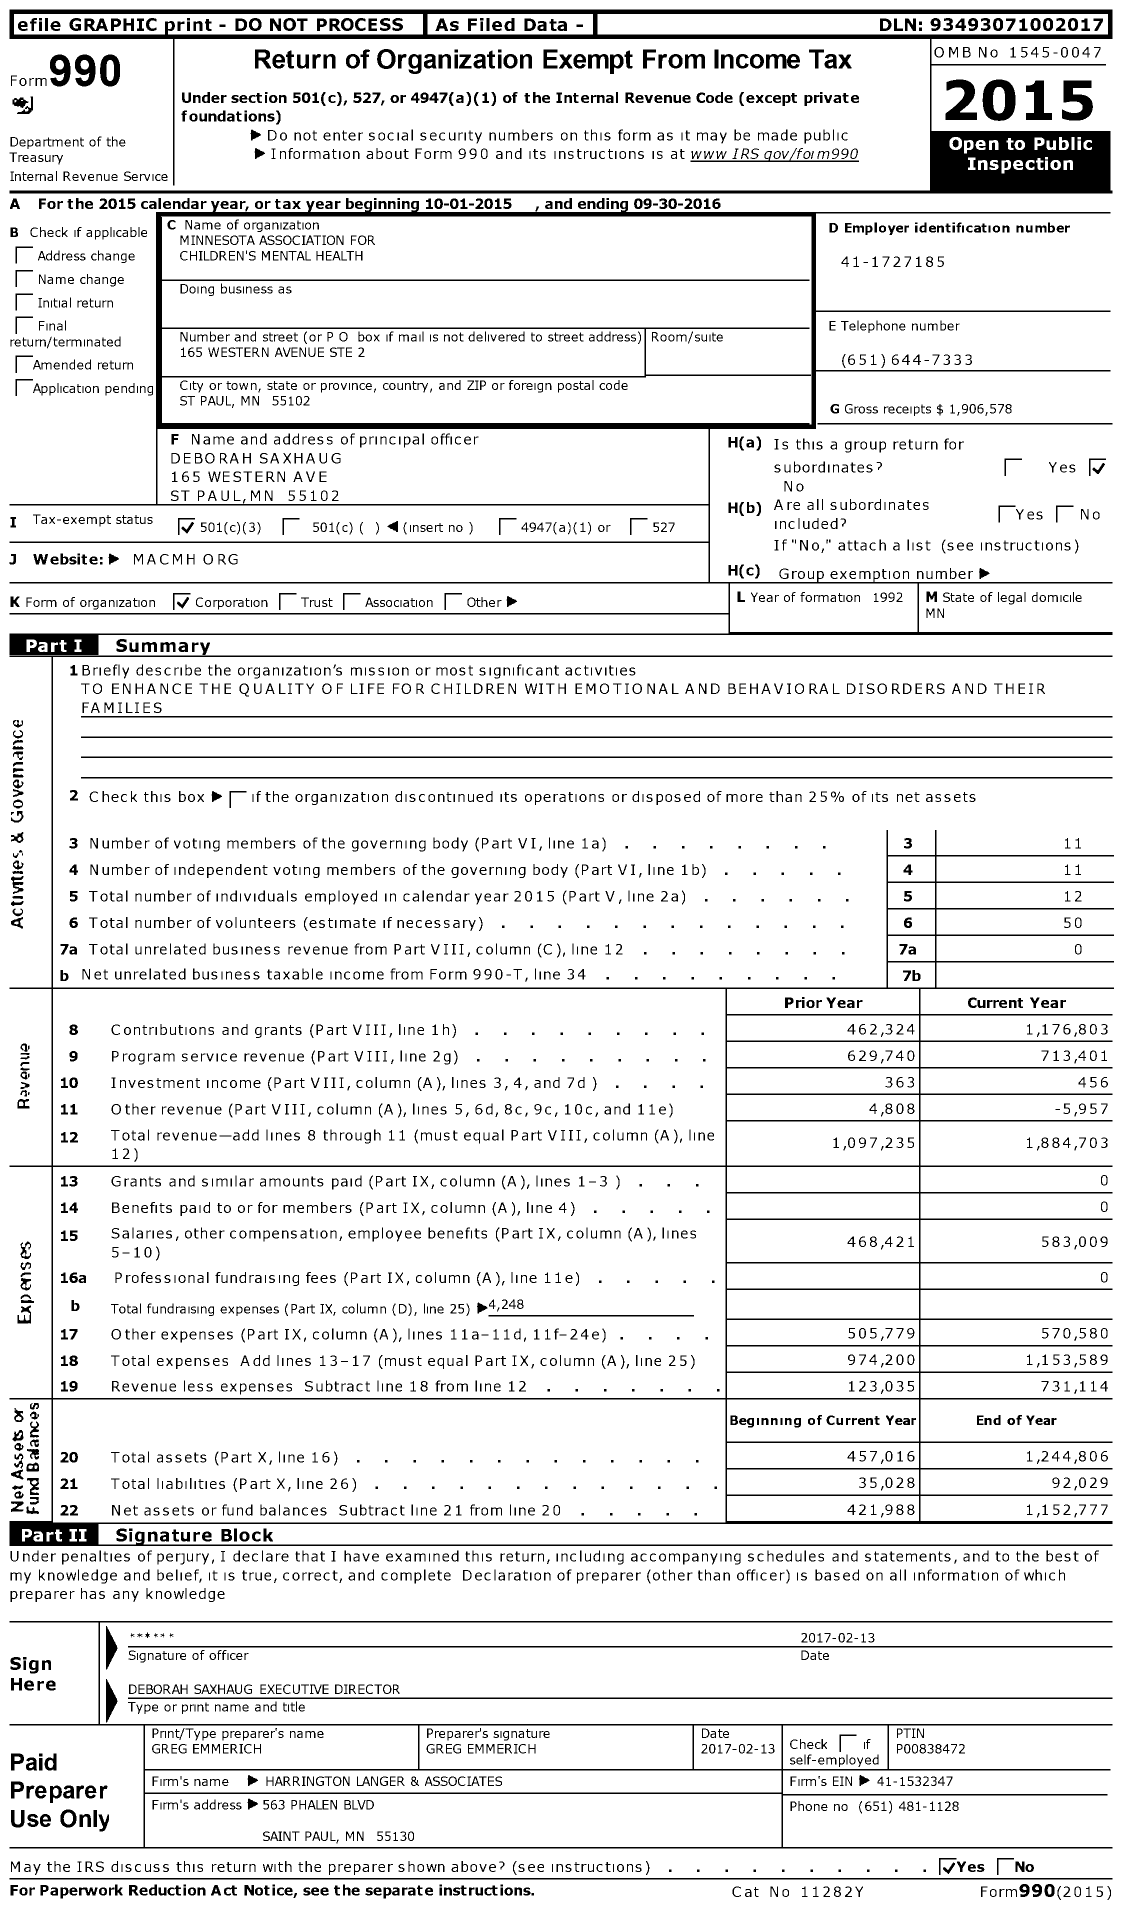 Image of first page of 2015 Form 990 for Minnesota Association for Children's Mental Health (MACMH)